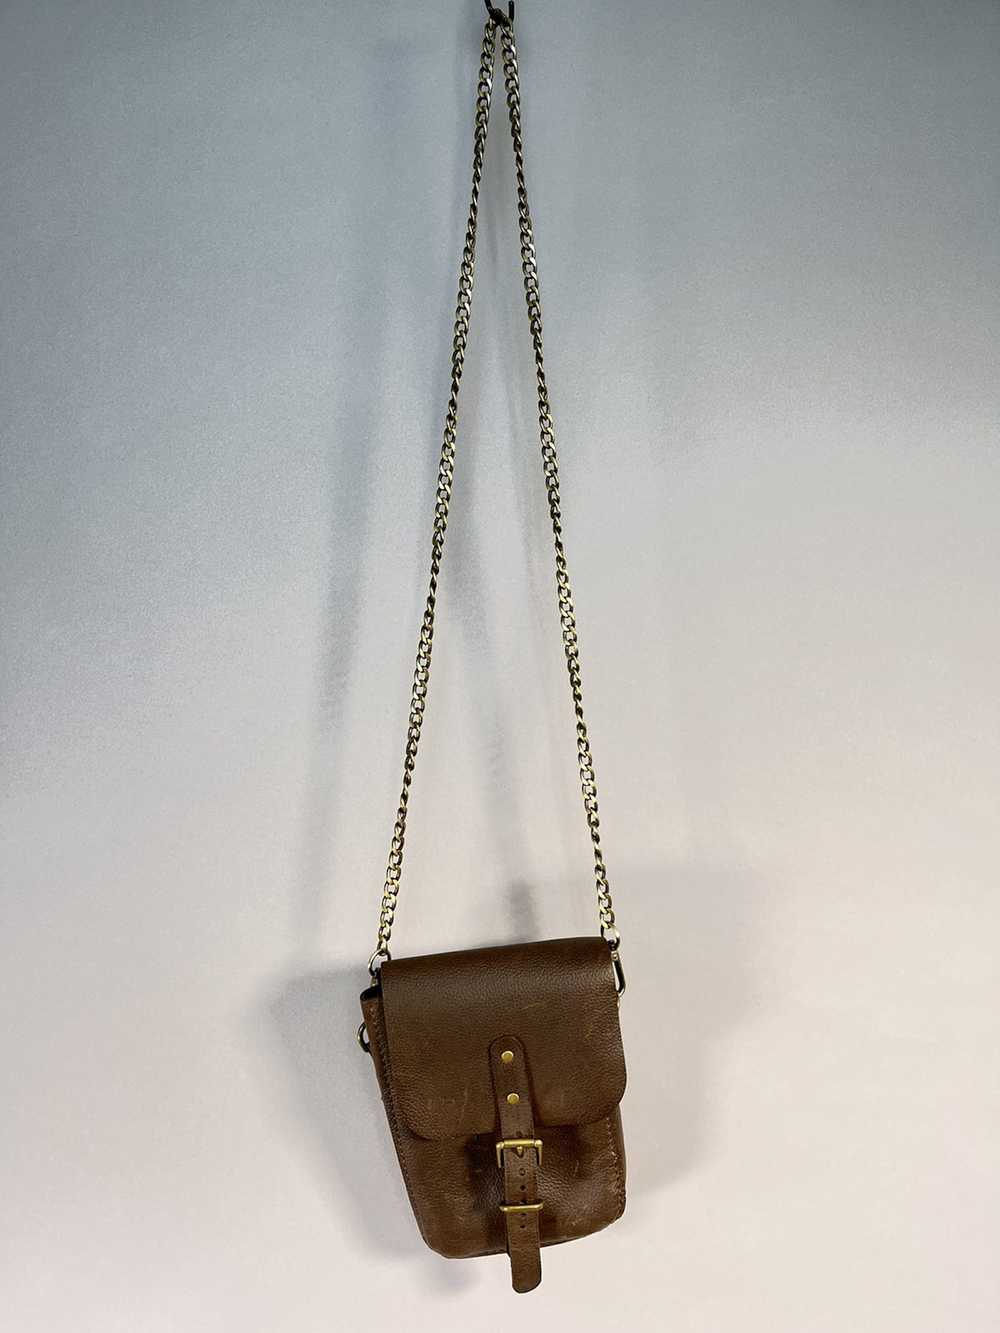 Leather × Vintage Vintage Leather Bag with Chain - image 1